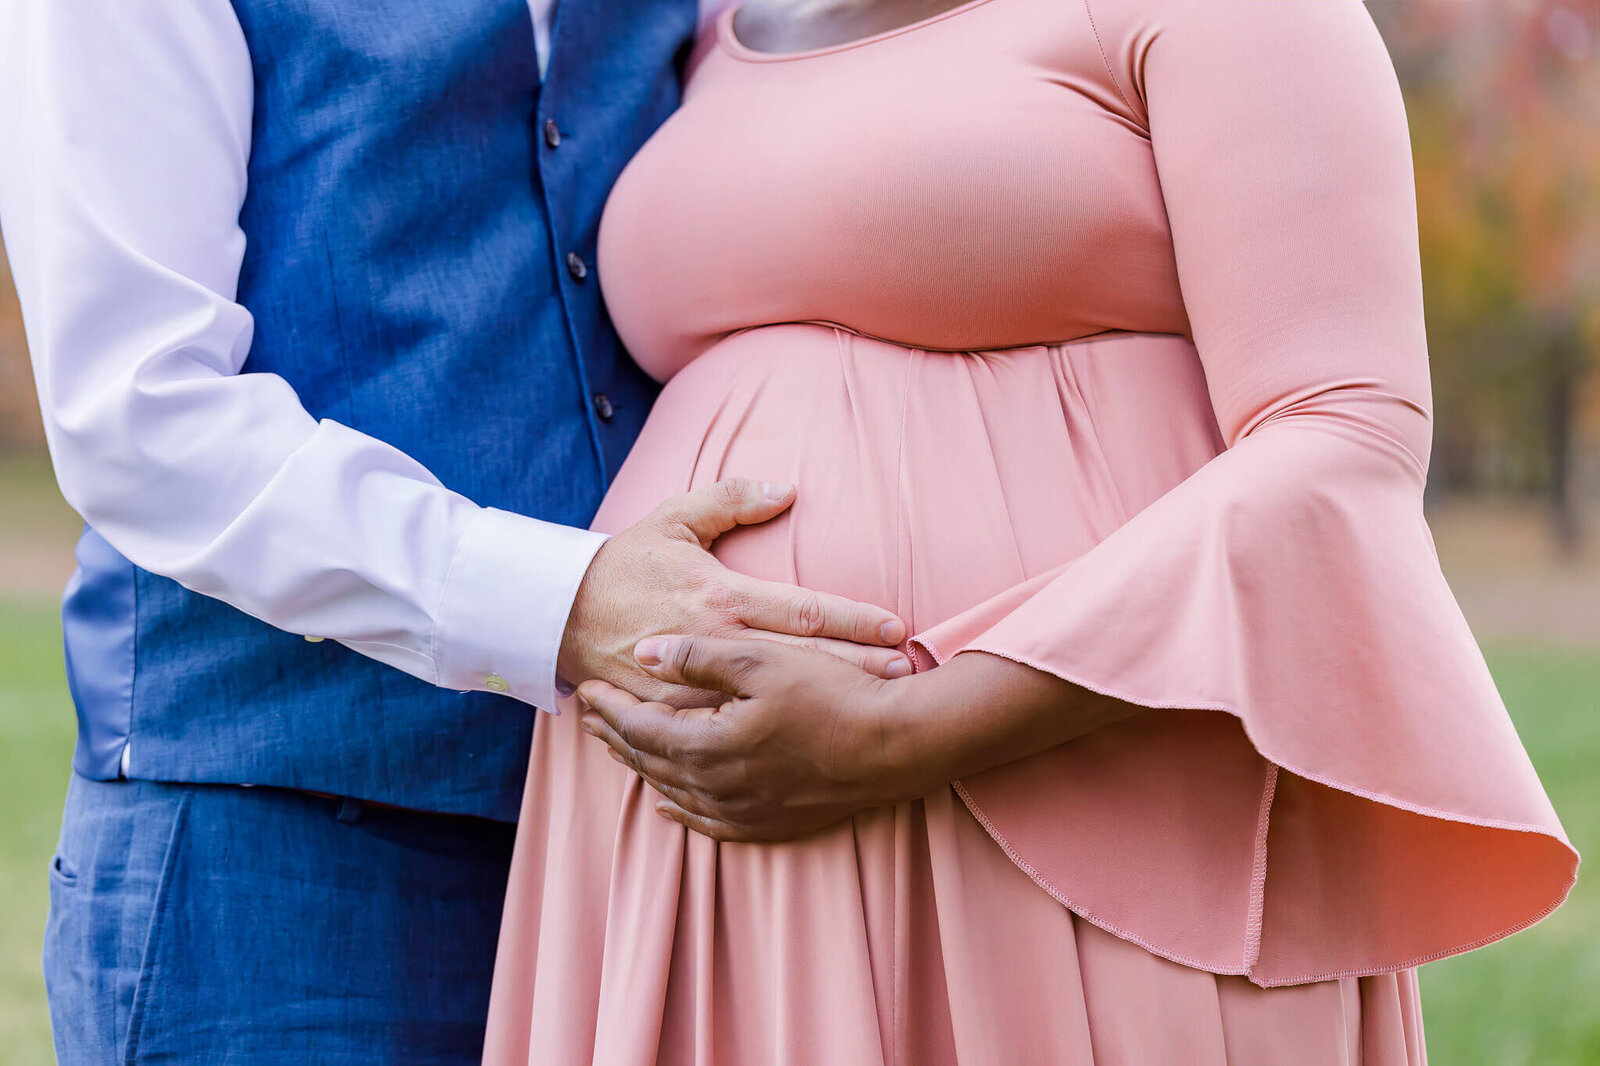 A close-up of a couple embracing her pregnant belly during their maternity session.